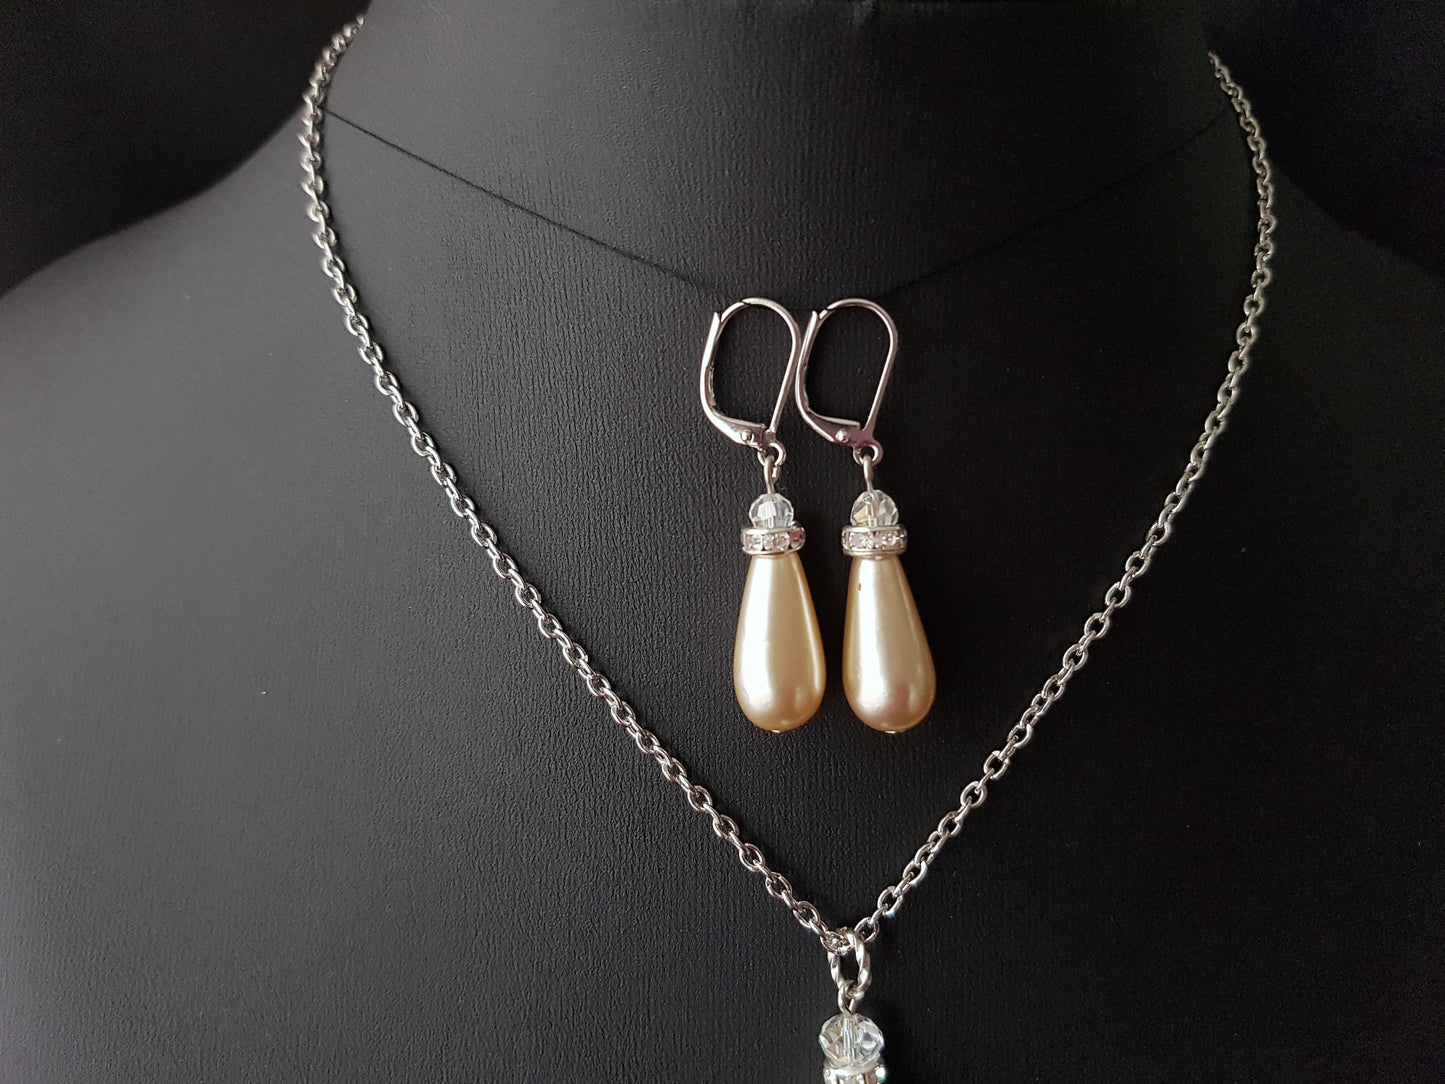 Crystal Pearl Drops Bridal, Bridesmaid Set of Necklace and Earrings, Off White-Cream Glass Drop Shape Pearls, Minimalist 